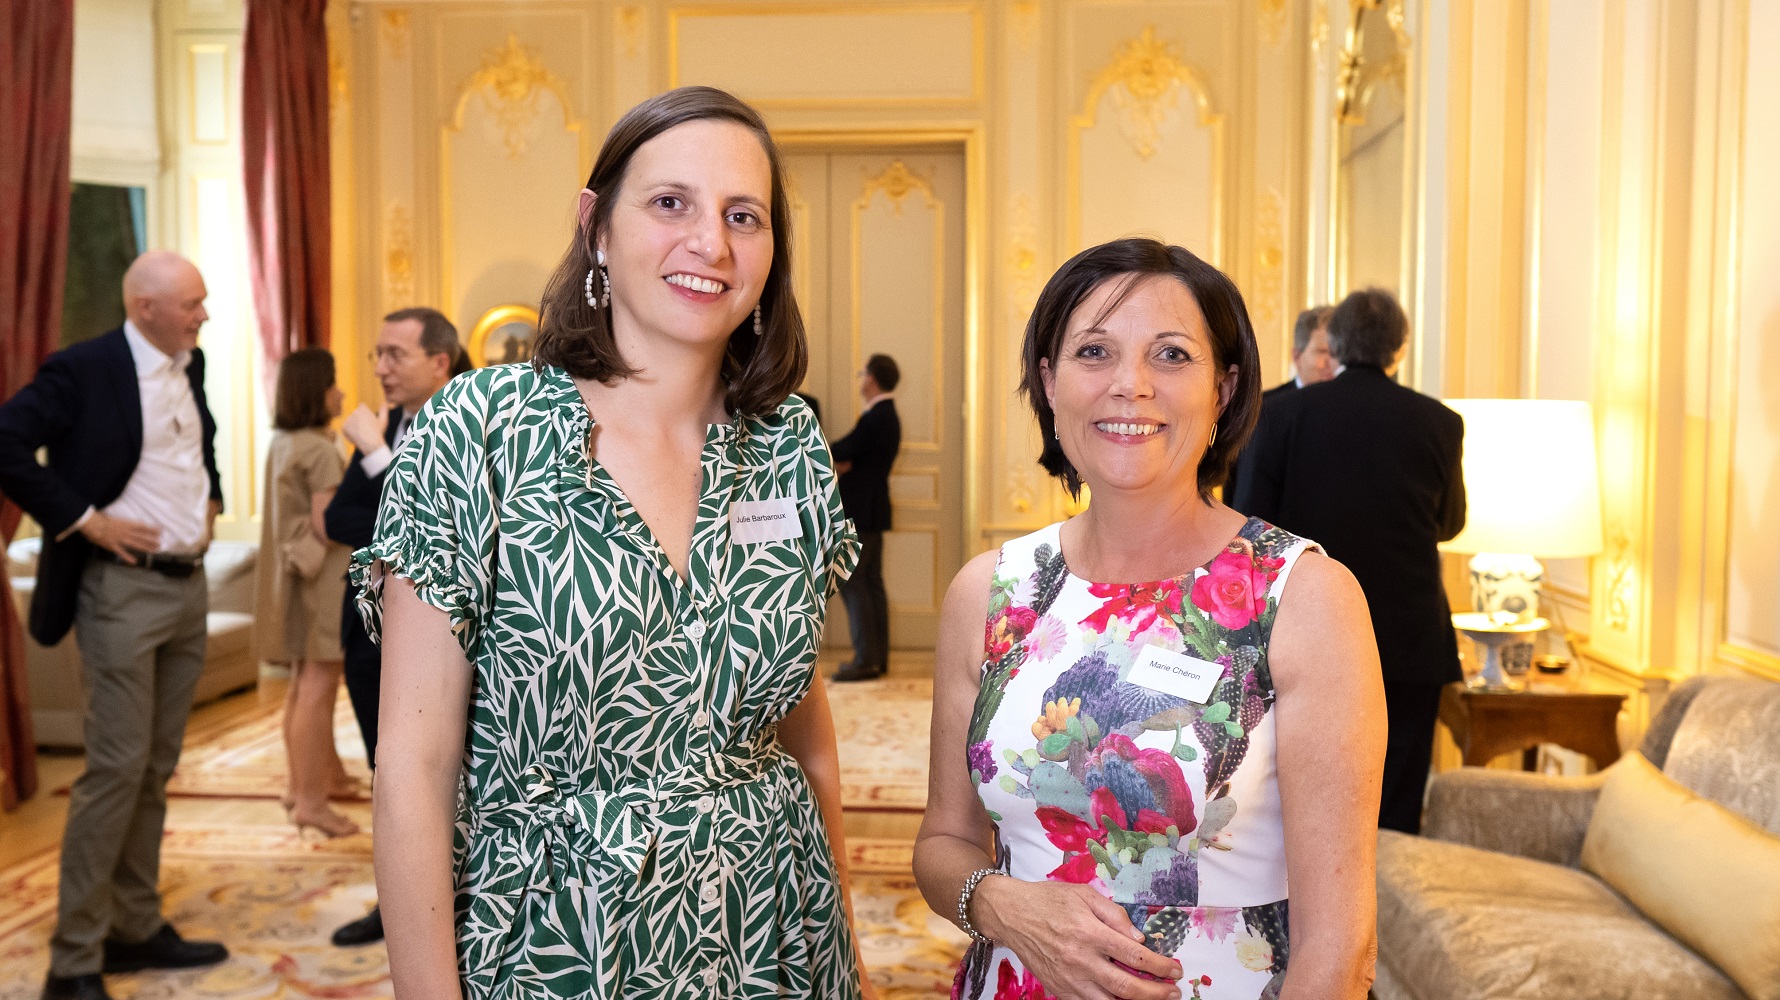 Visual aid: two women posing at an event at the French Embassy in London